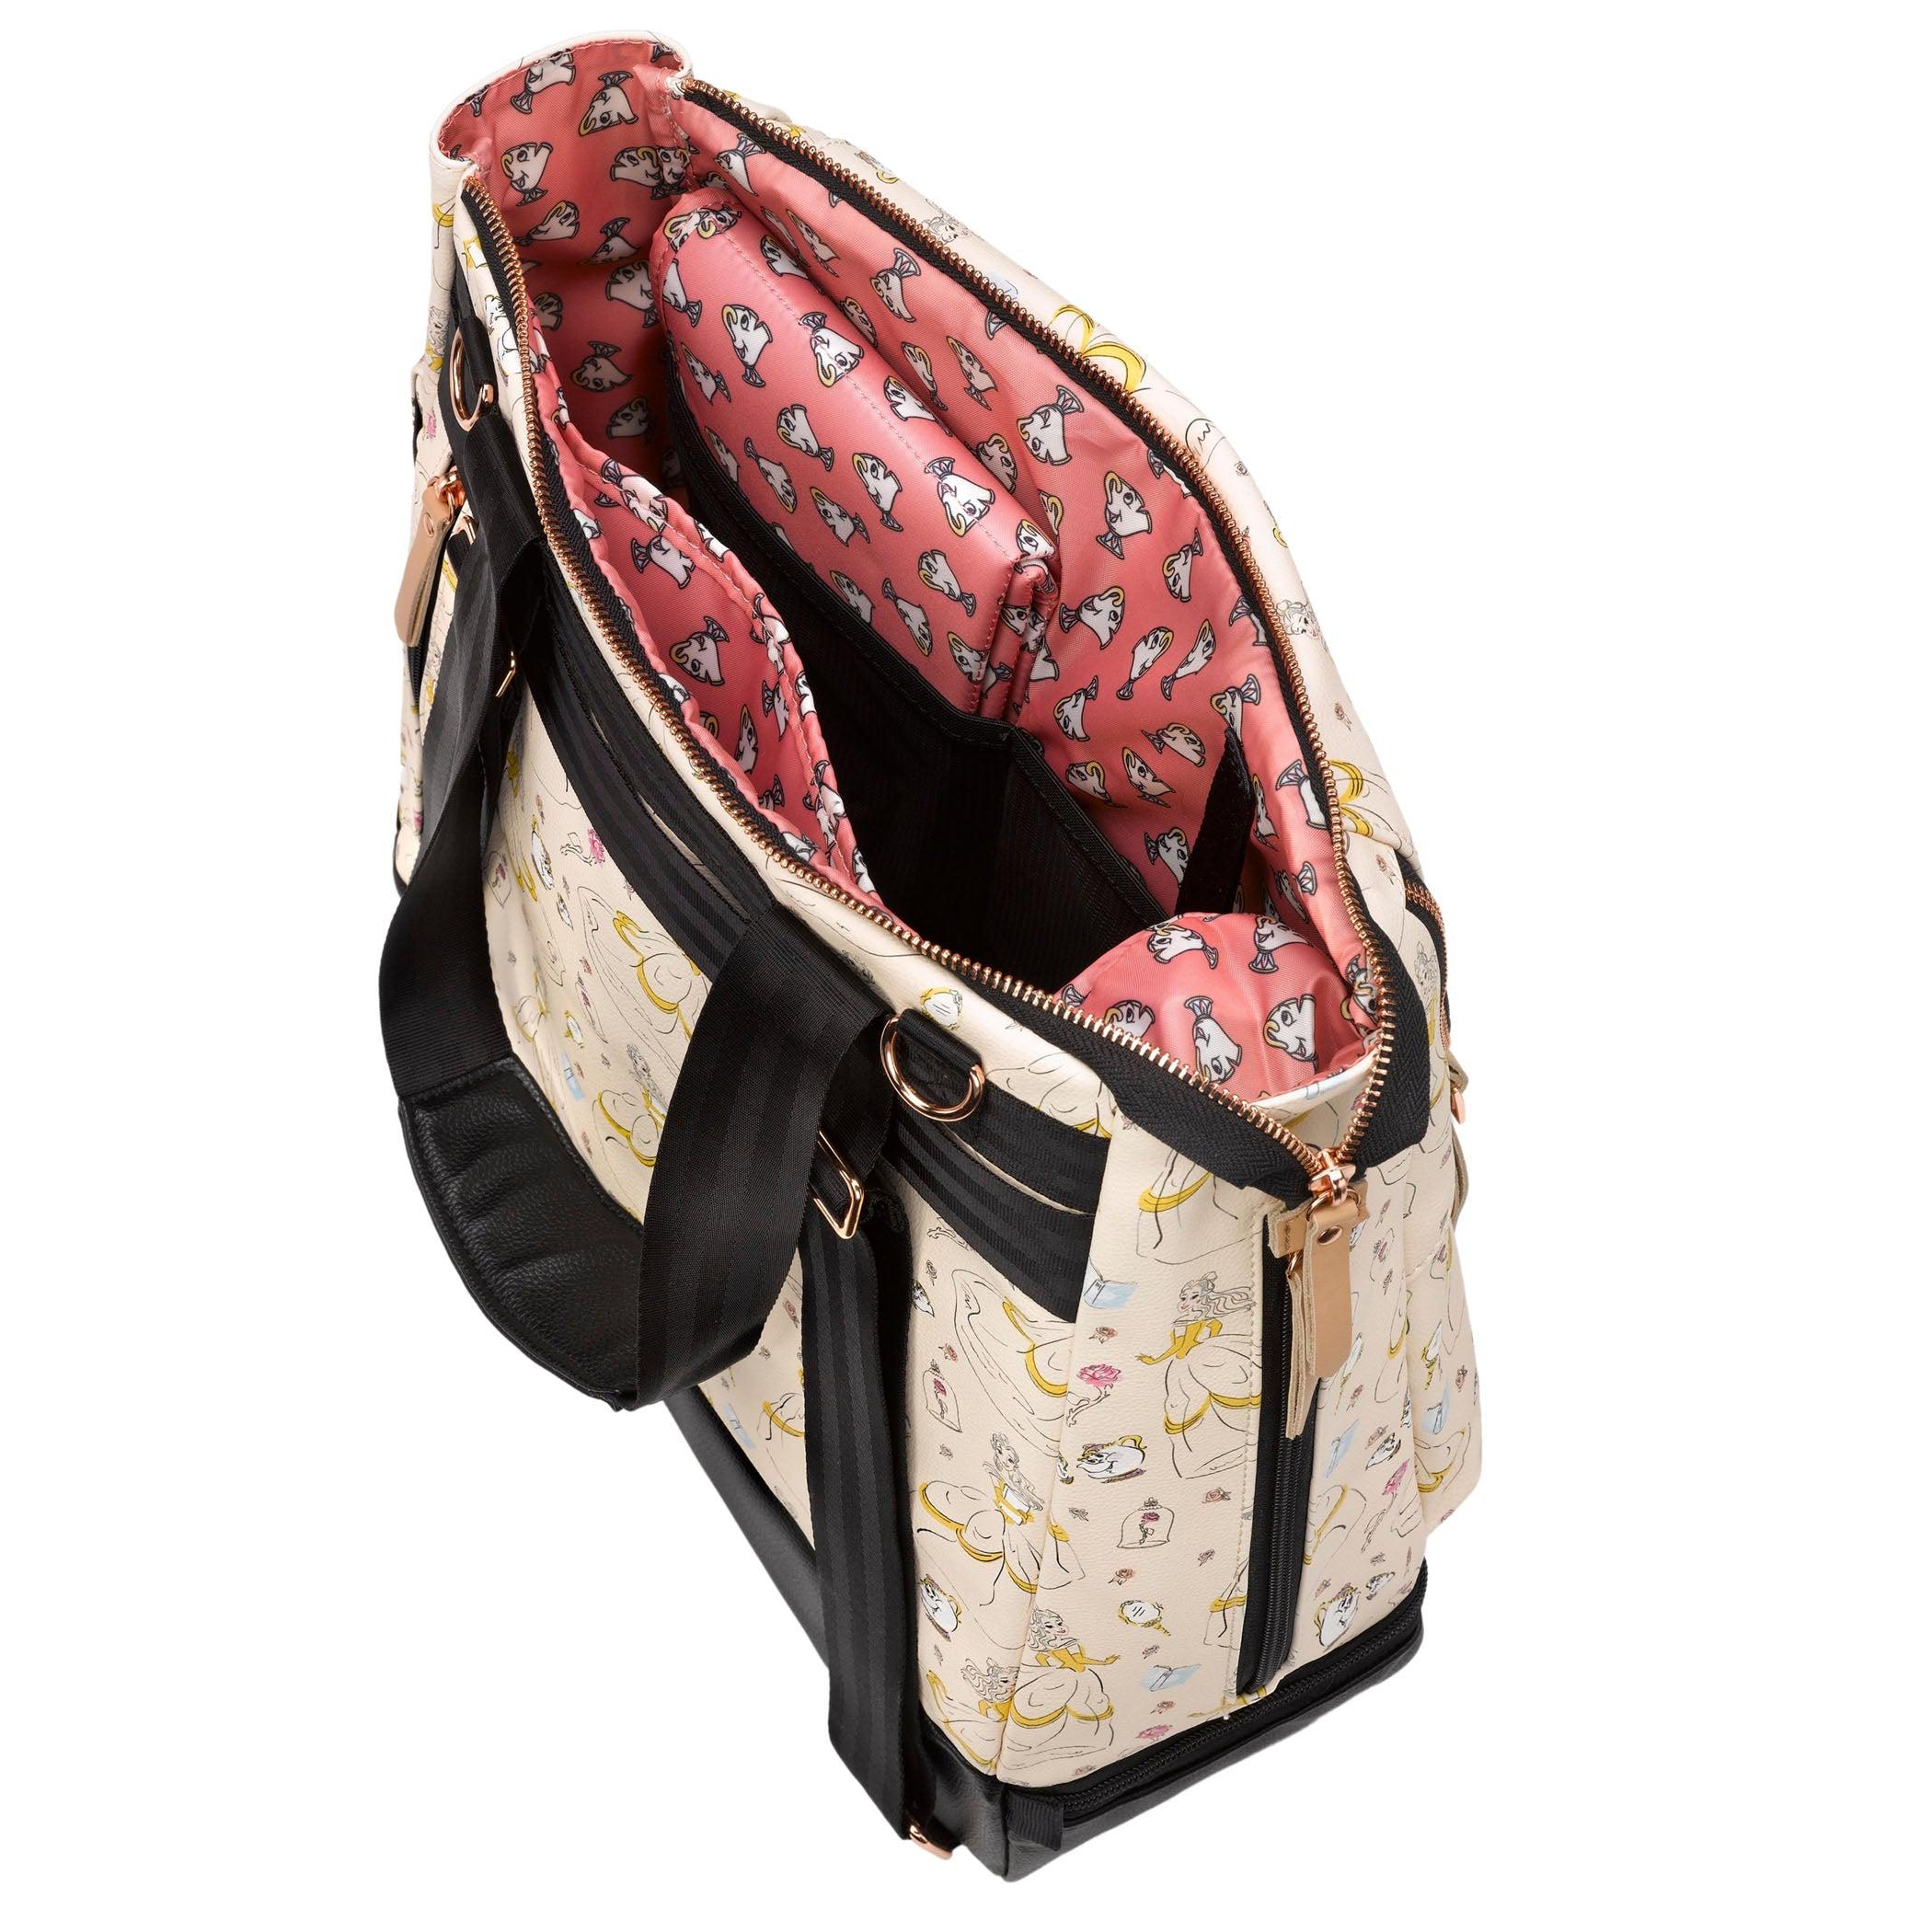 Petunia Pickle Bottom Convertible Tote Backpack Pivot Pack in Whimsical Belle